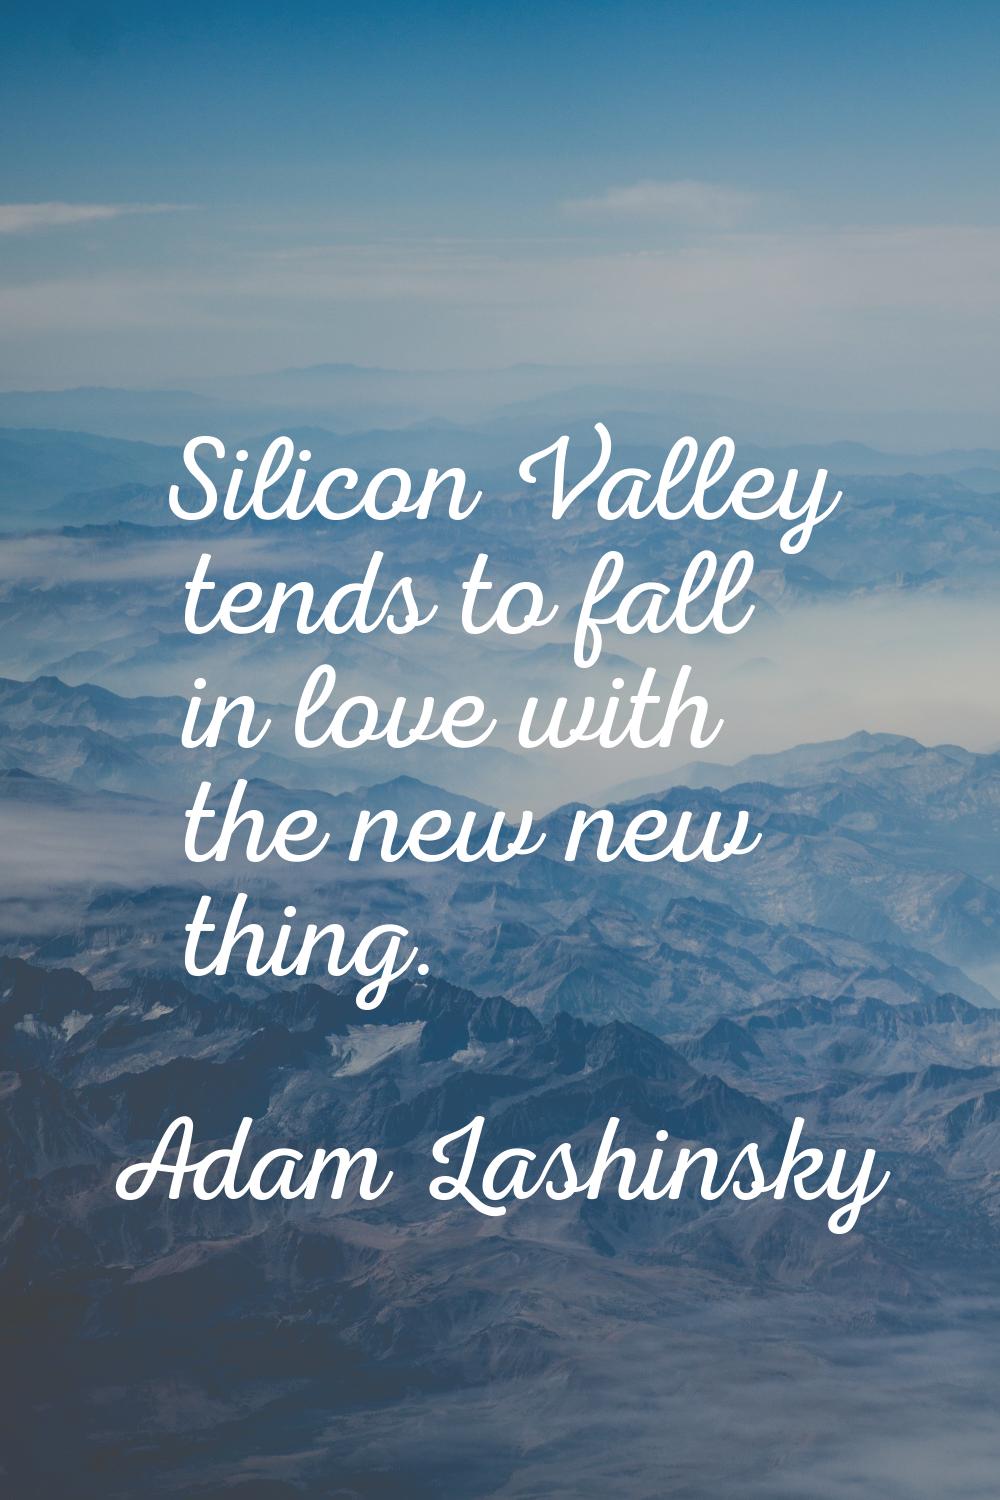 Silicon Valley tends to fall in love with the new new thing.